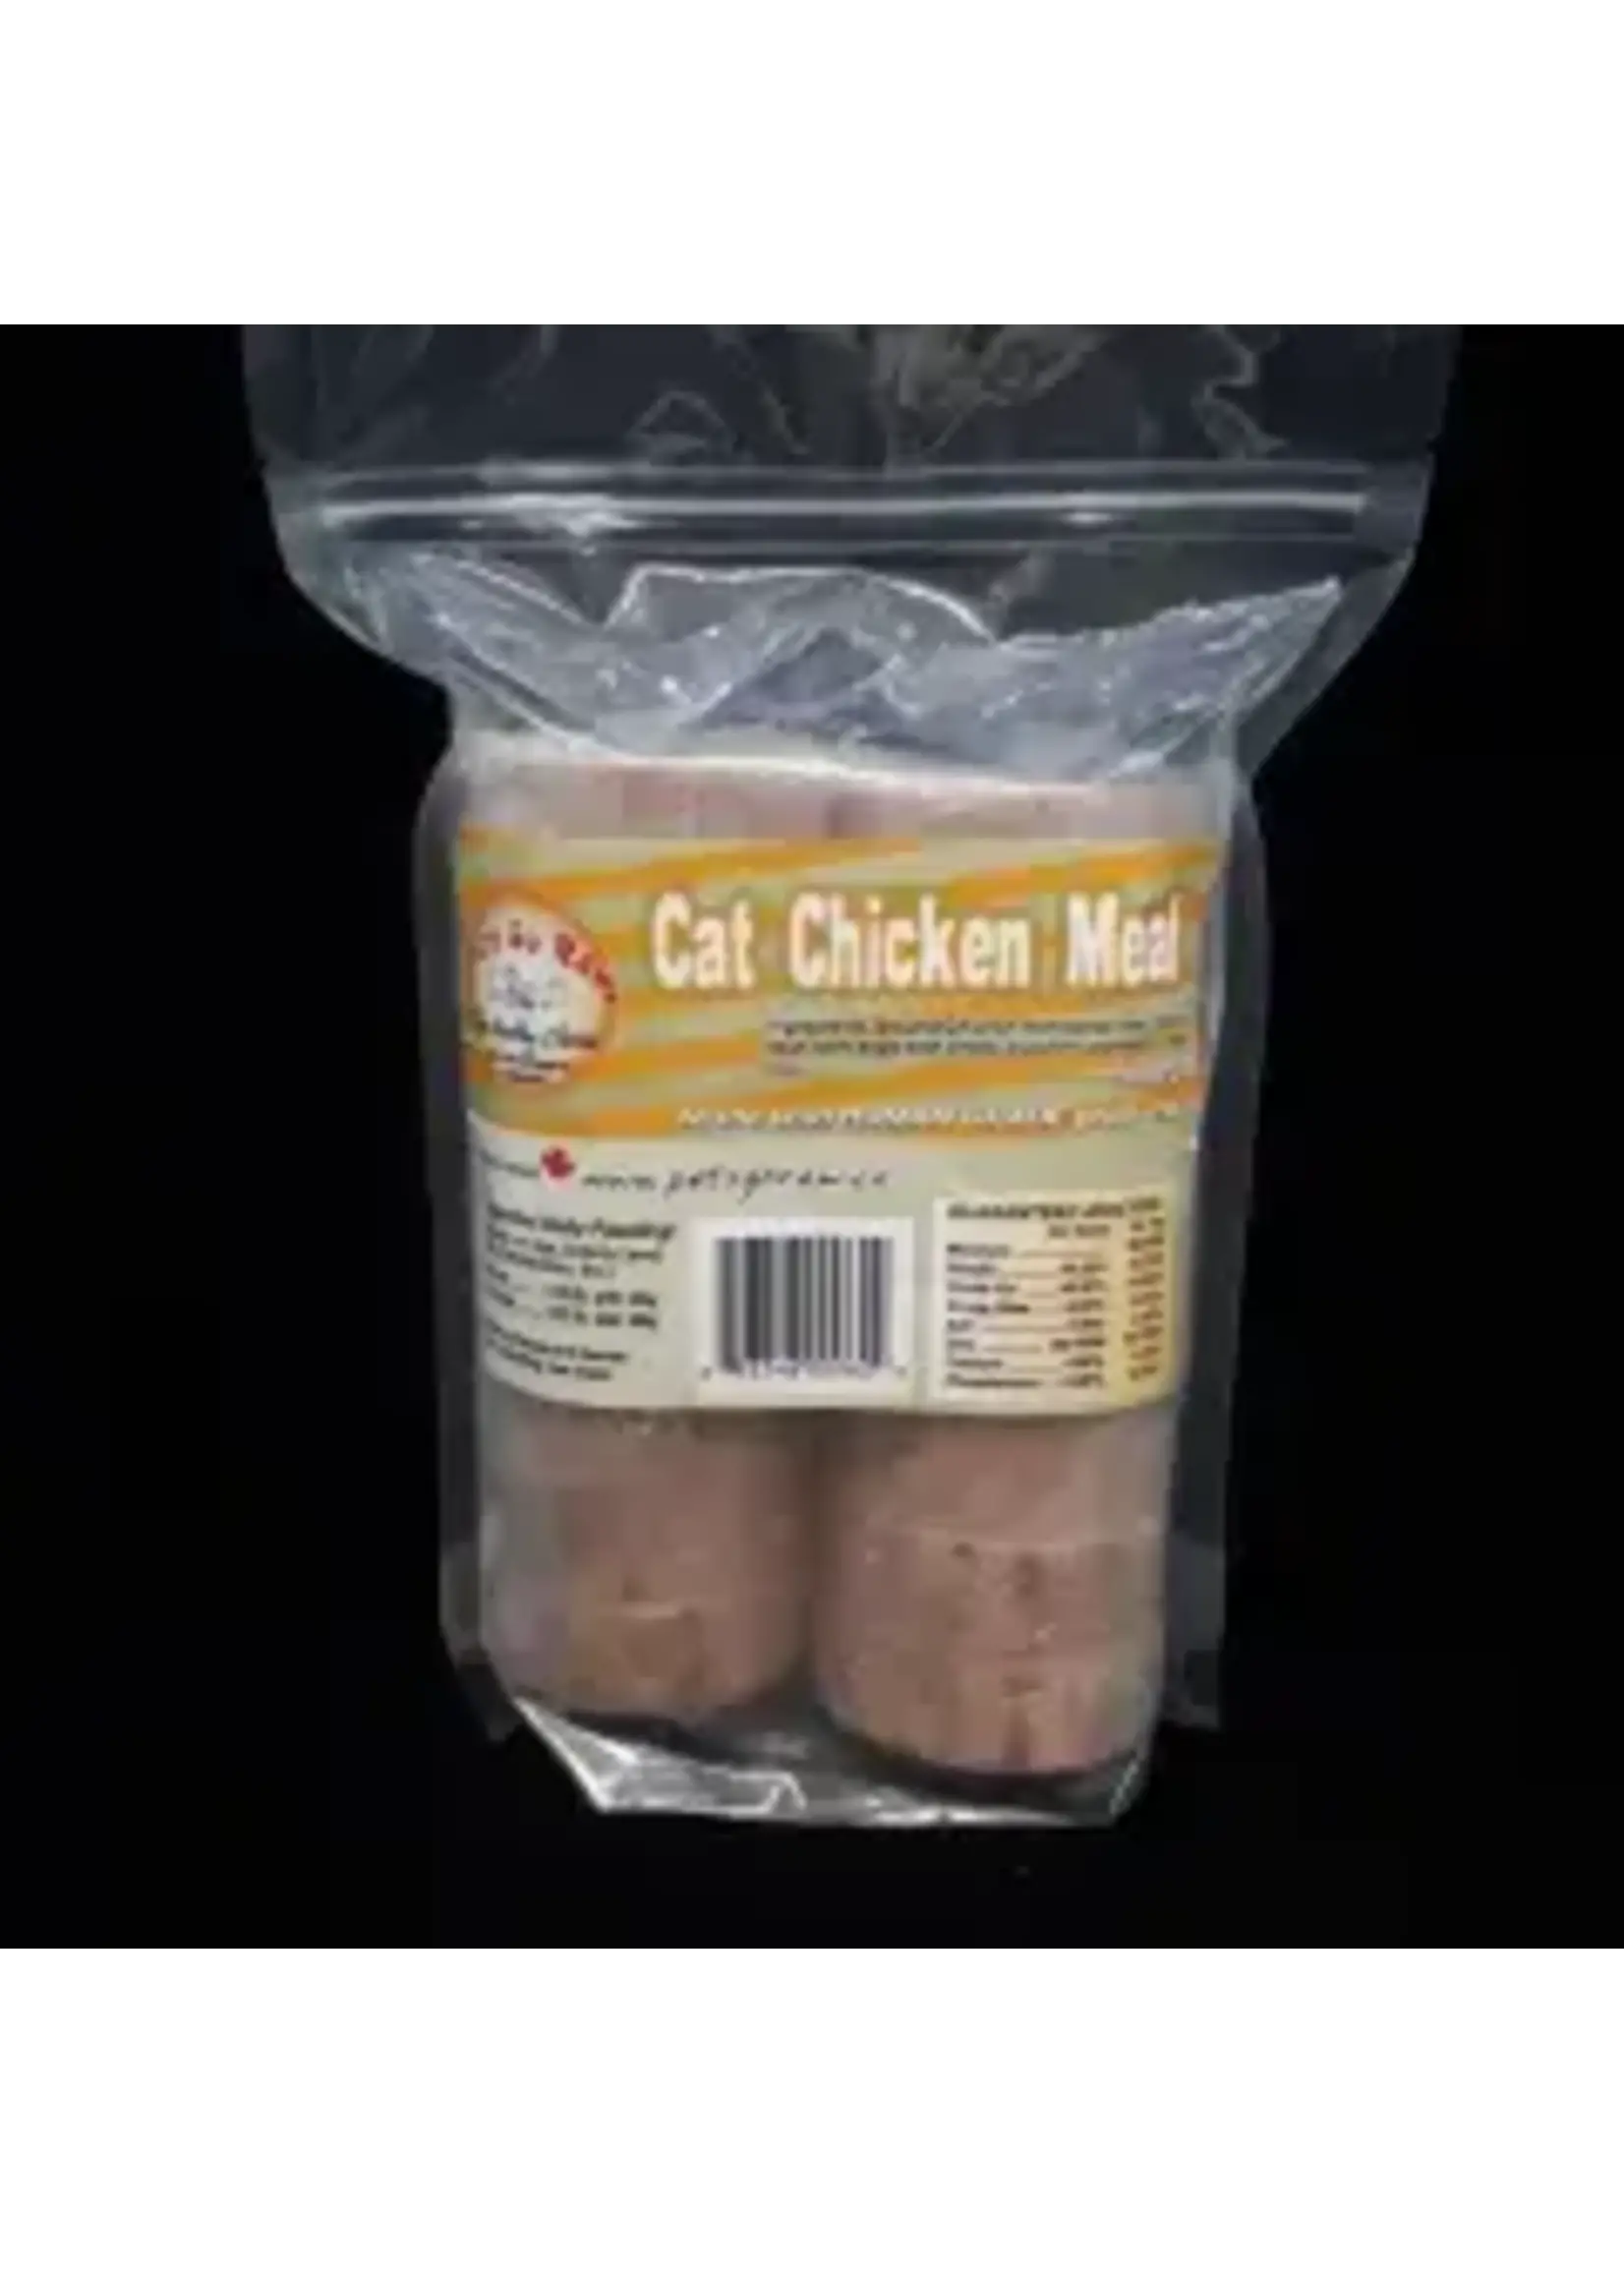 Pets Go Raw Pets Go Raw - Chicken Full Meal Cat 2lb